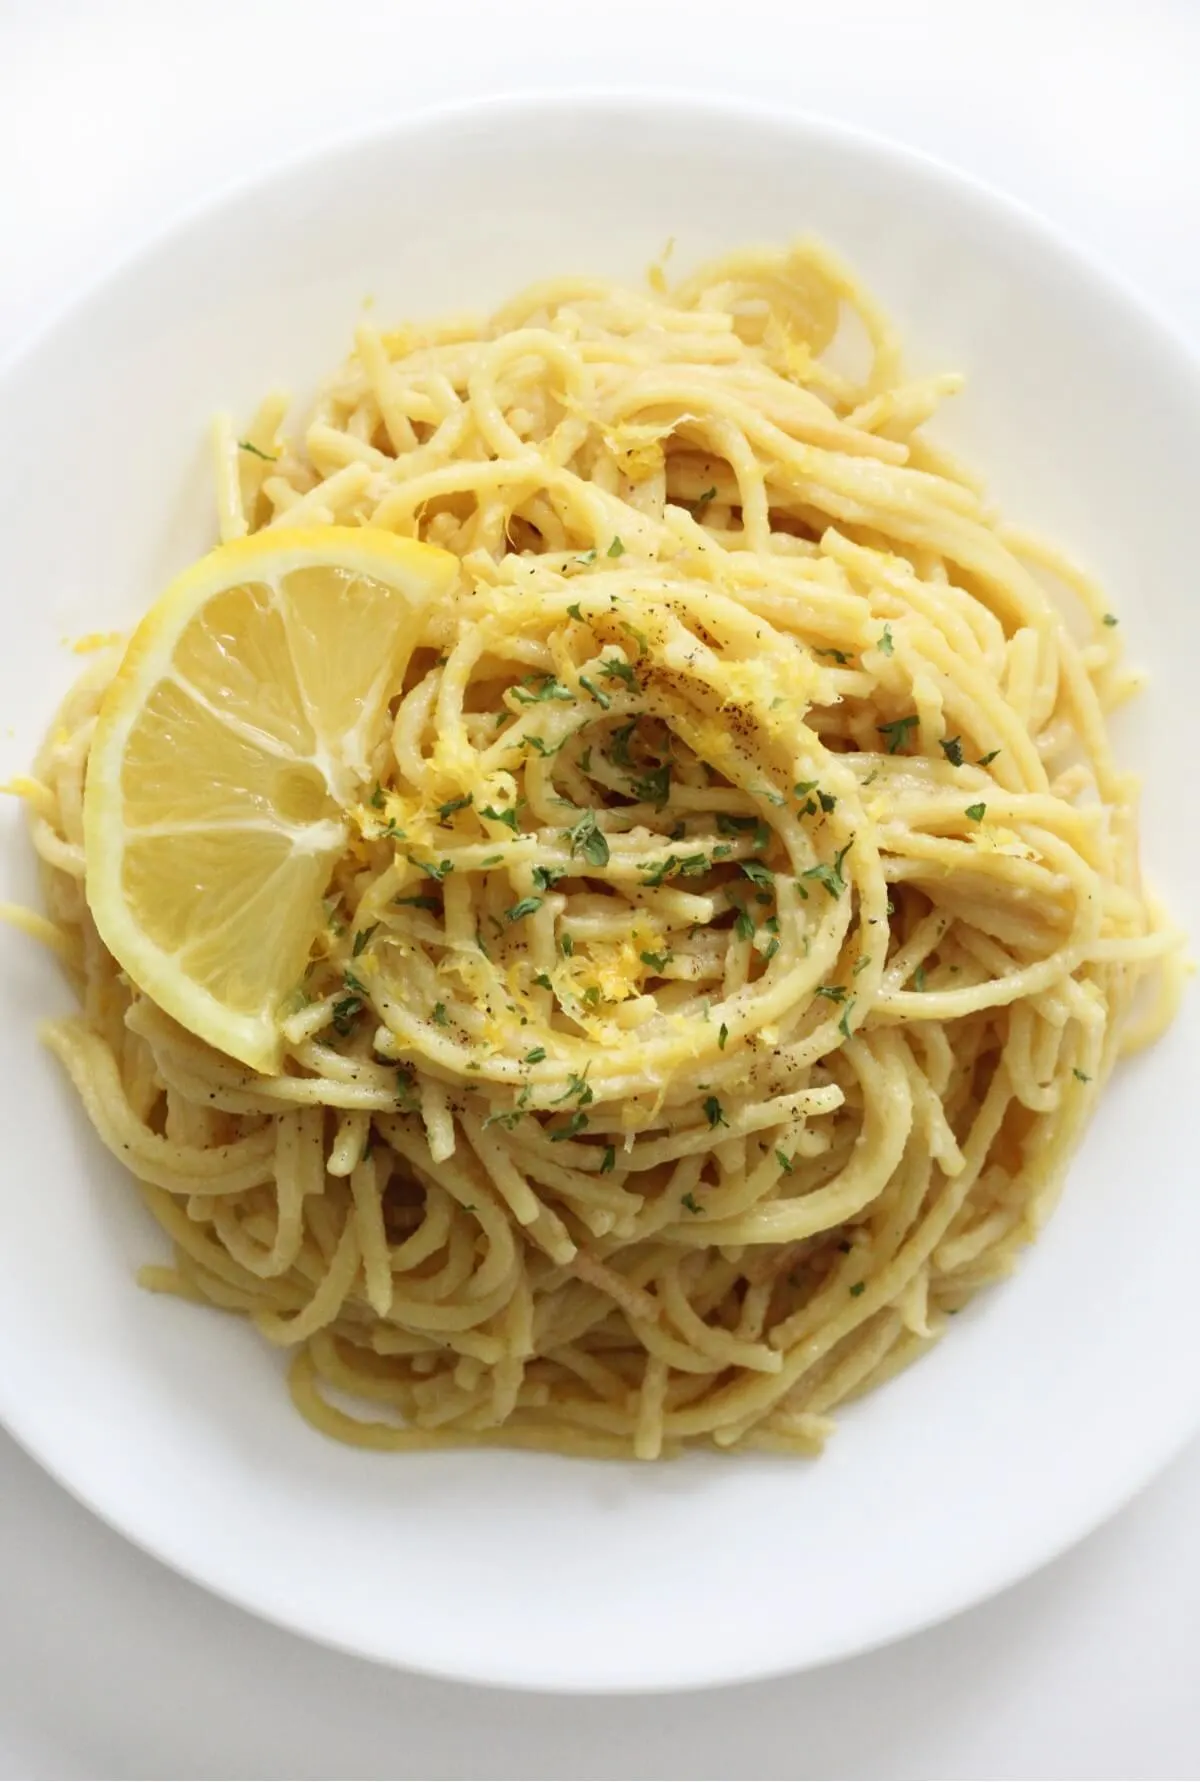 An upclose of the noodles topped with cheese and lemon wheels.